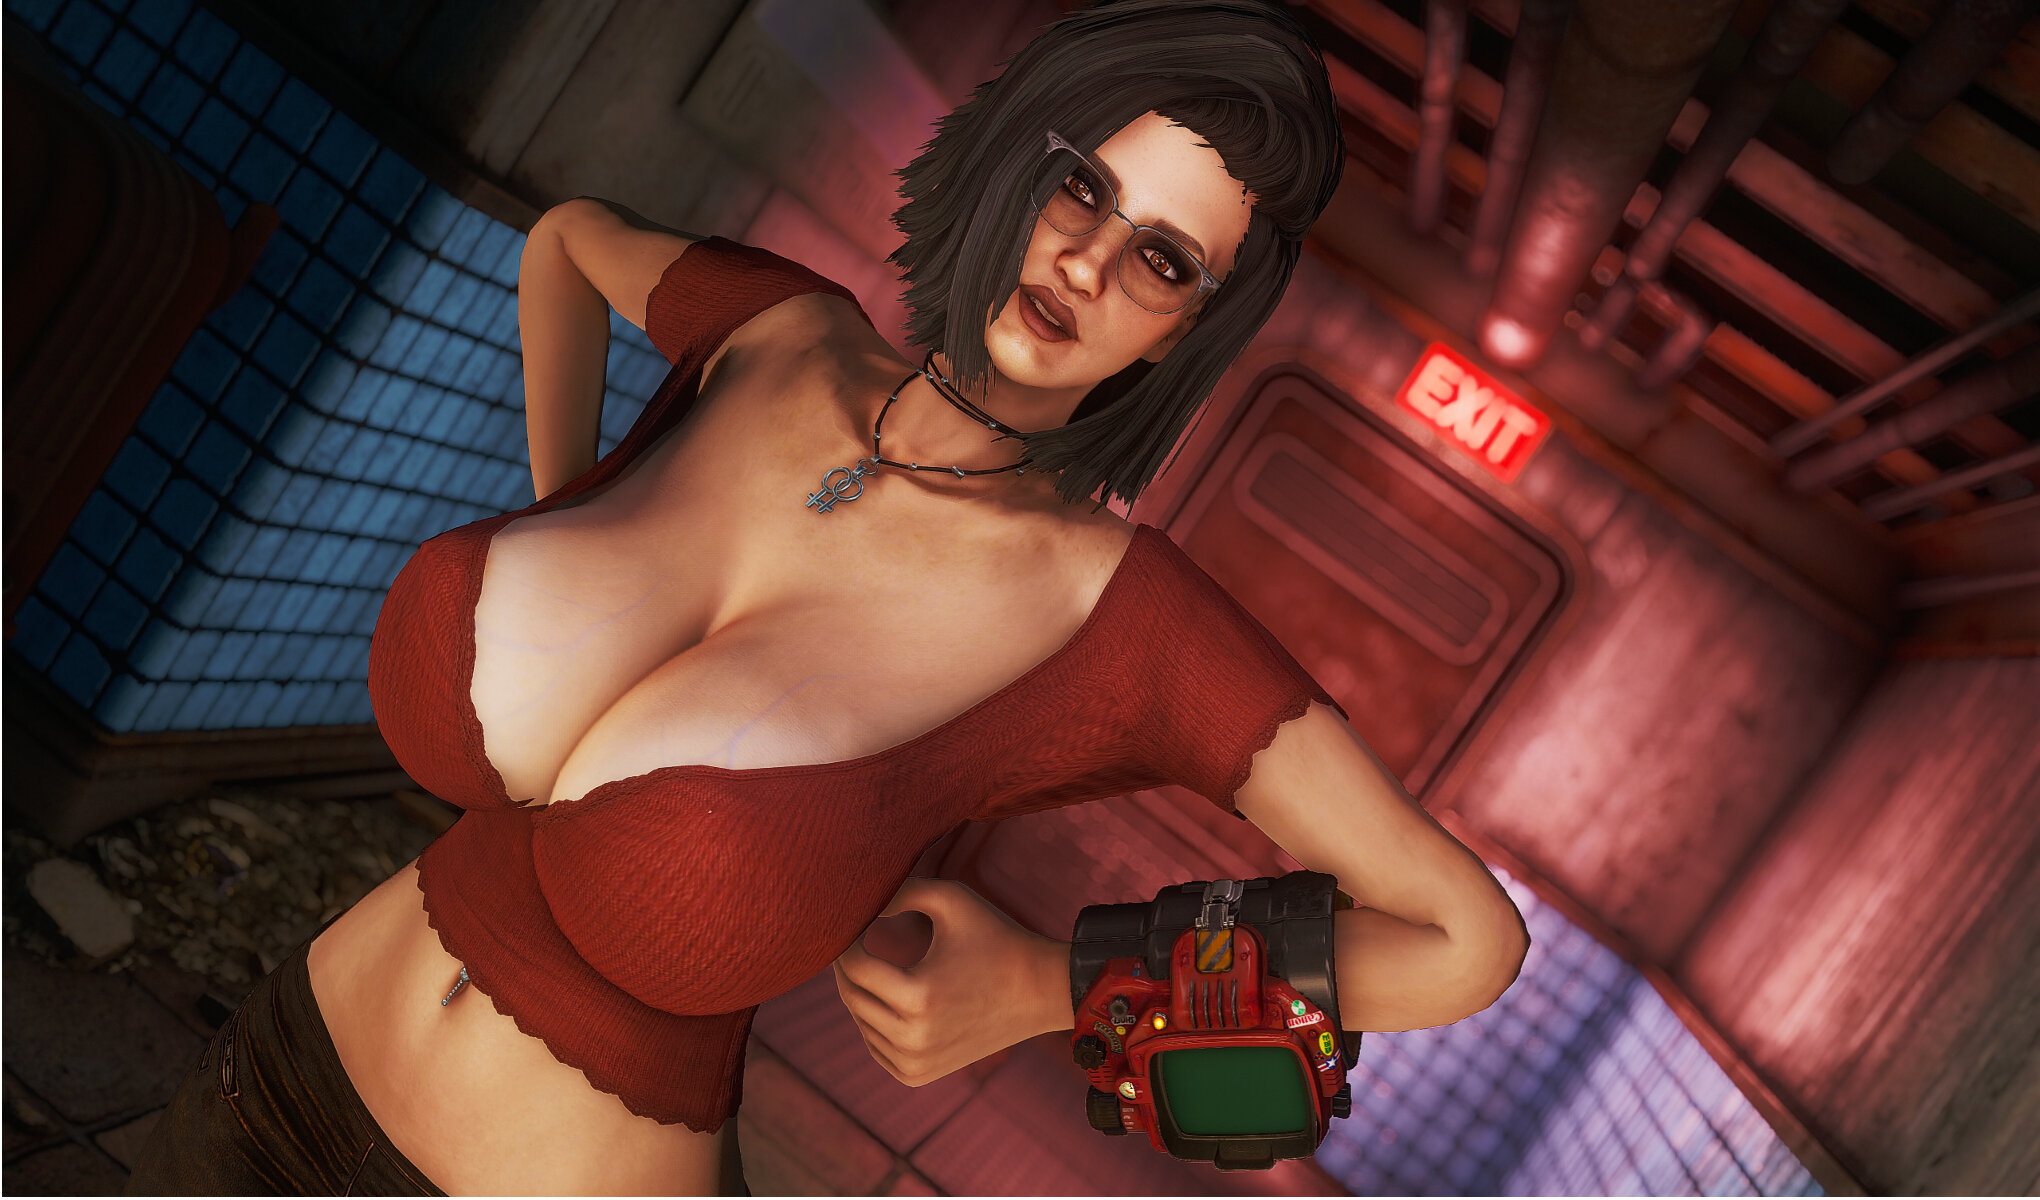 What Body Preset Mod is this? - Request & Find - Fallout 4 Non